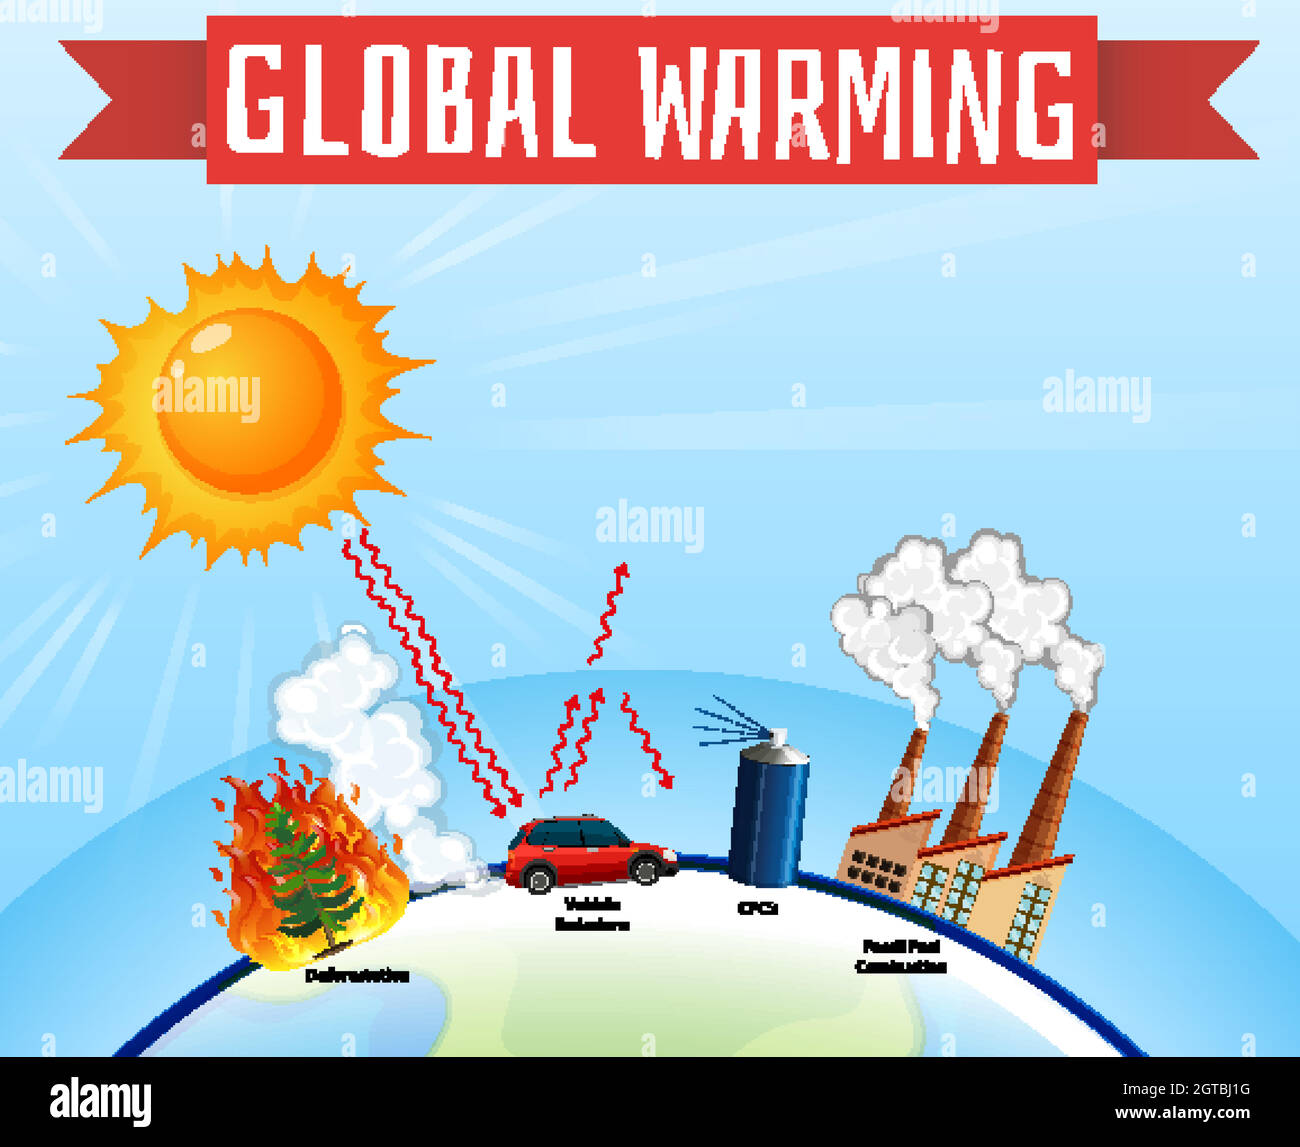 Diagram showing global warming on earth Stock Vector